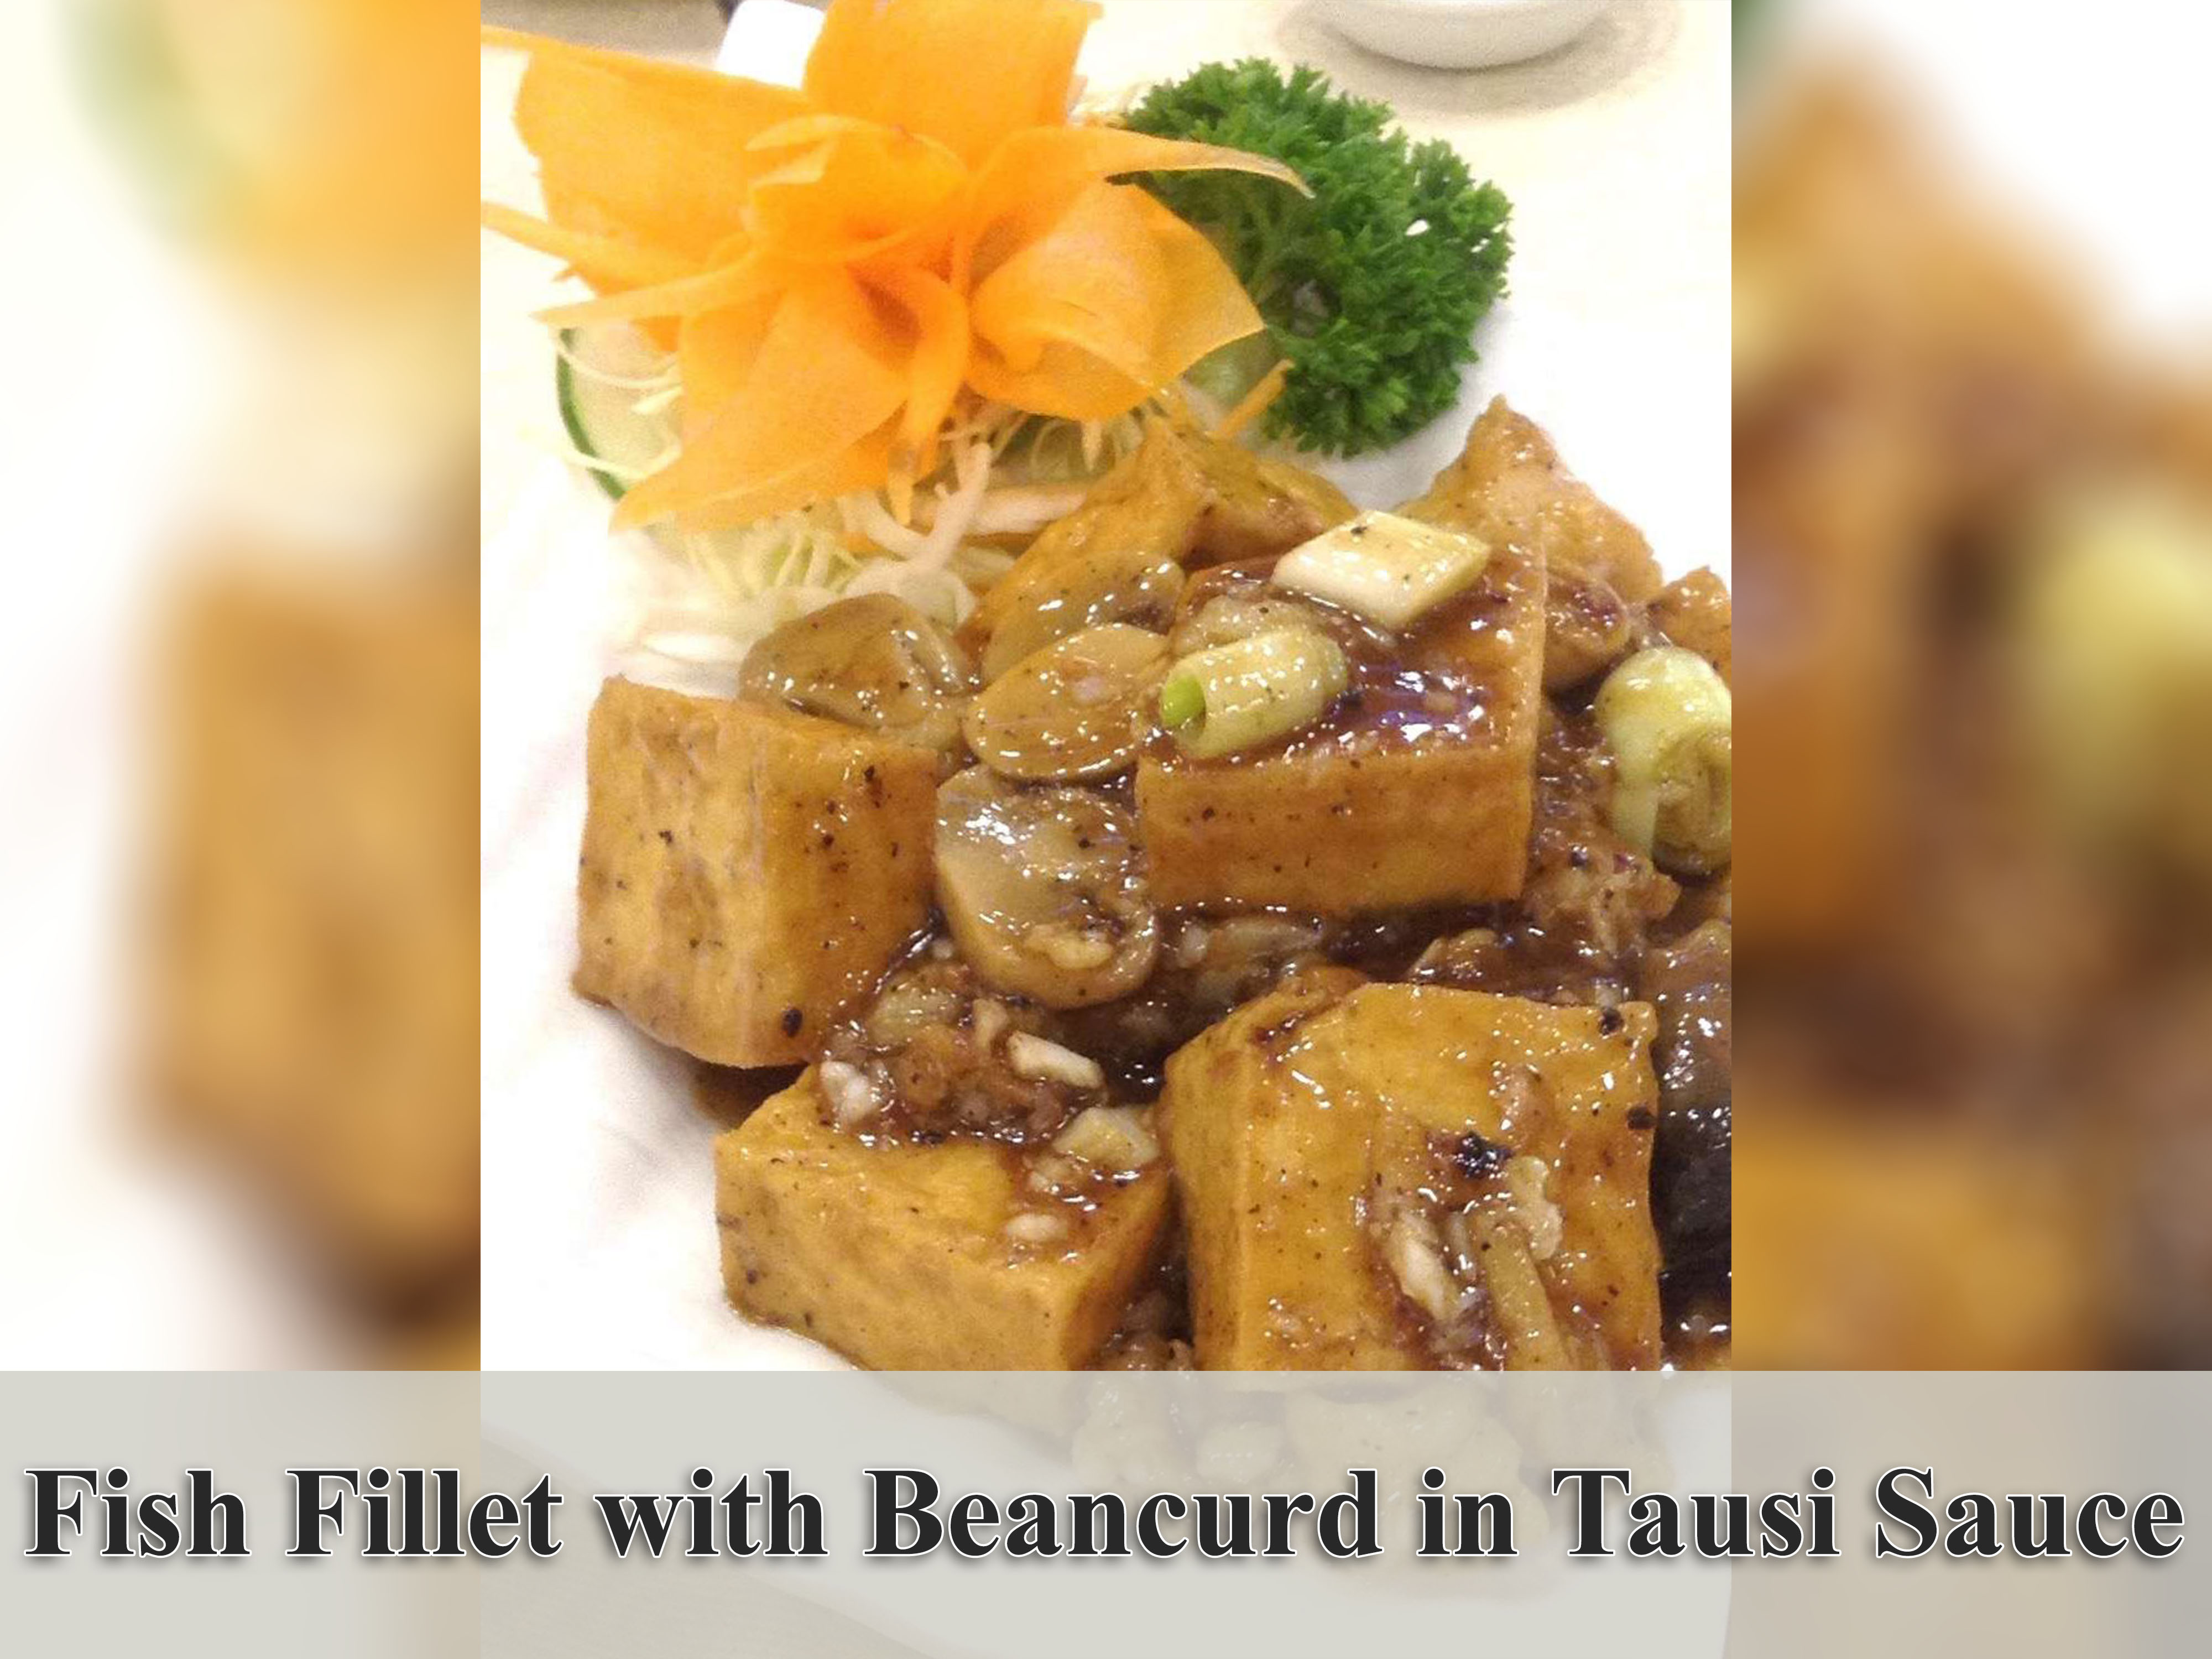 Fish Fillet with Beancurd in Tausi Sauce